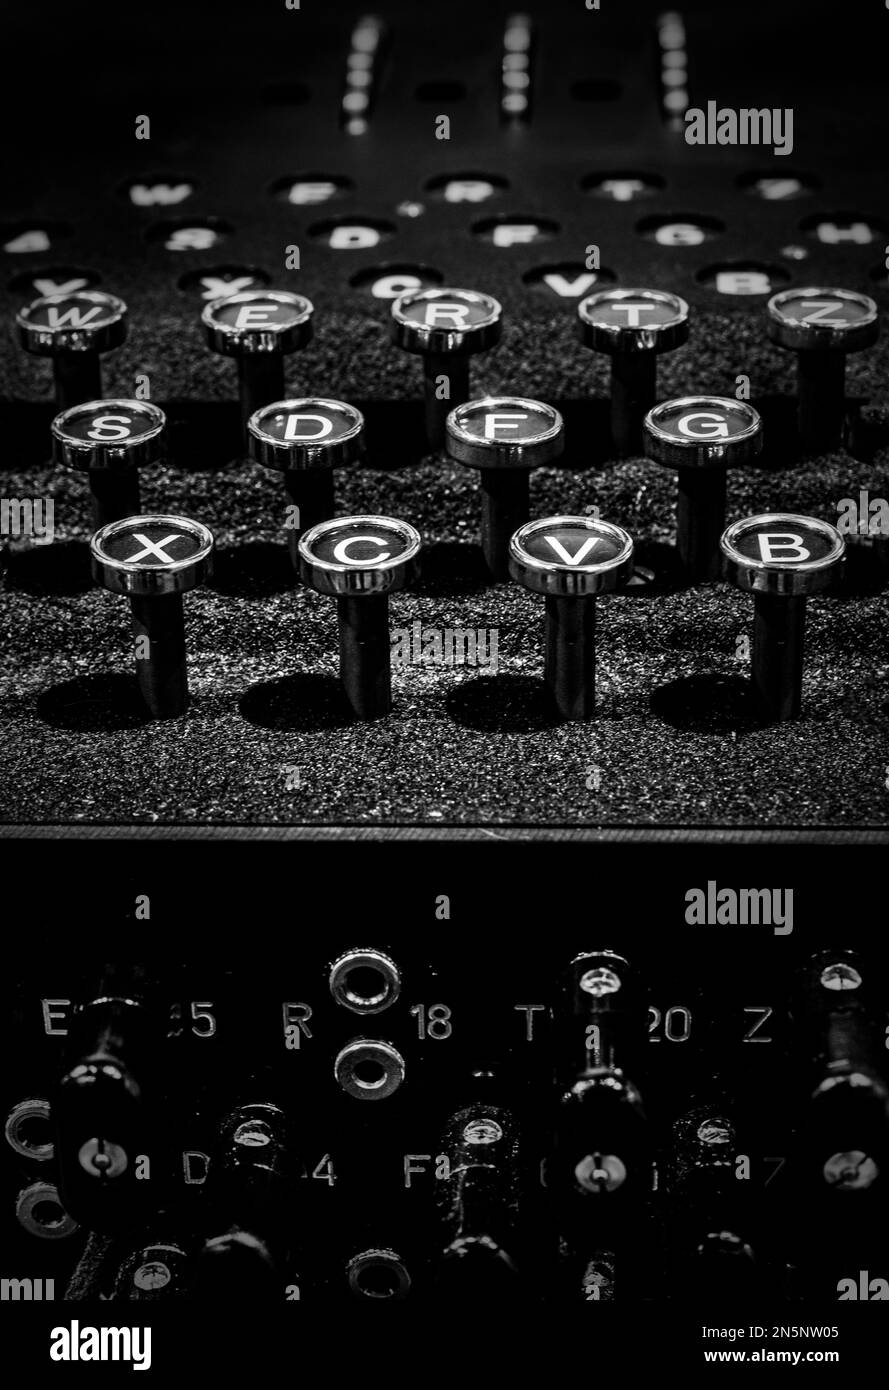 Rare German World War II 'Enigma' machine keyboard, bulbs and encryption rotors used by code breakers at Bletchley Park. Stock Photo